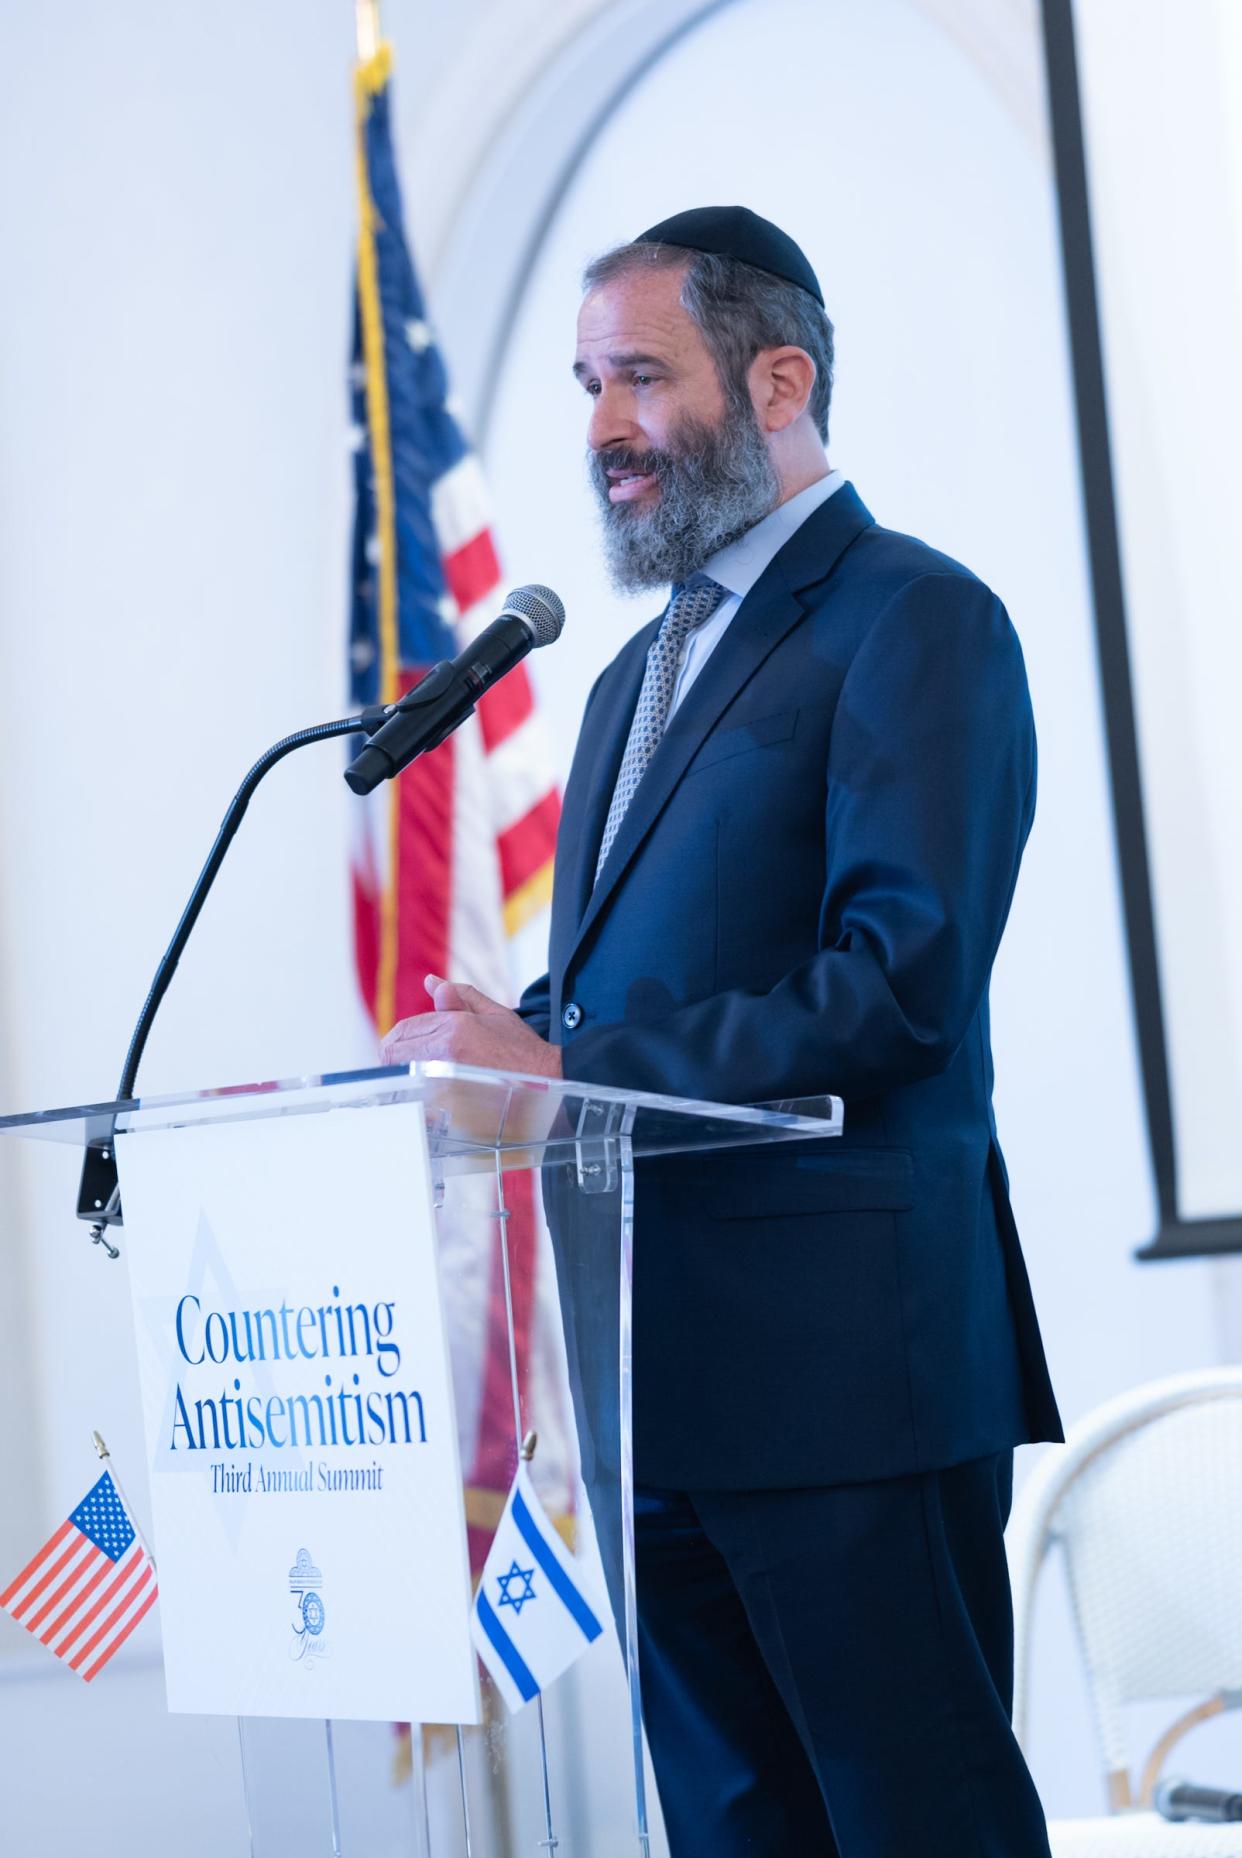 Palm Beach Synagogue Rabbi Moshe Scheiner stressed the importance of combatting antisemitism in every generation during his opening remarks.